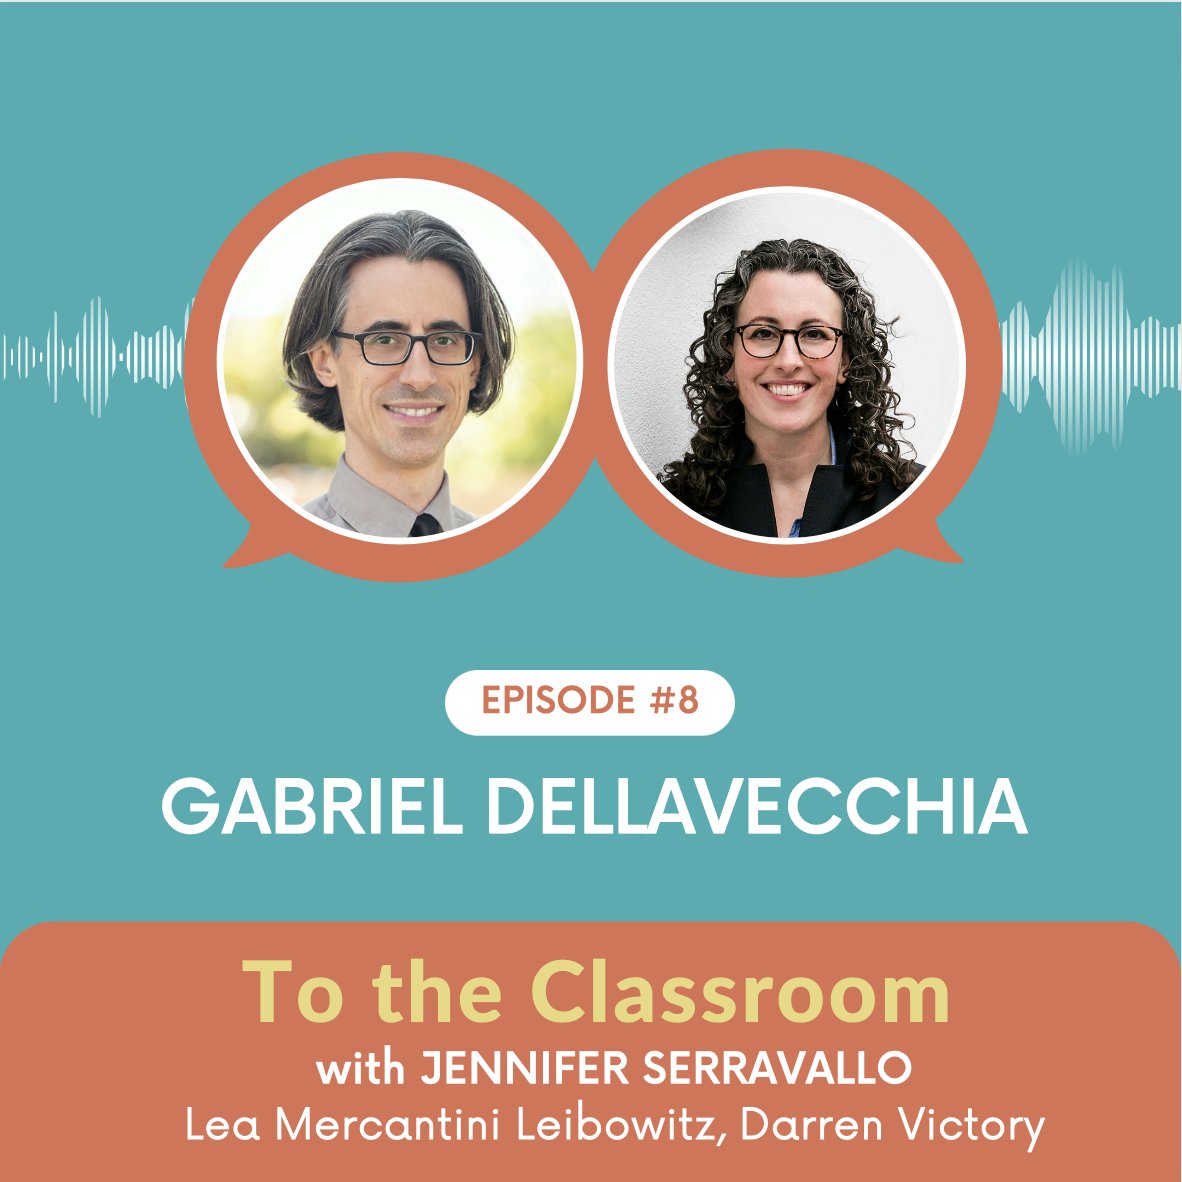 Did you know 3rd grade retention laws are on the books in some form in TWENTY SEVEN US states? True! So you might wonder: Is there research that retaining children helps literacy outcomes? High school graduation rates? Social-emotional wellbeing? Listen: jenniferserravallo.com/podcast